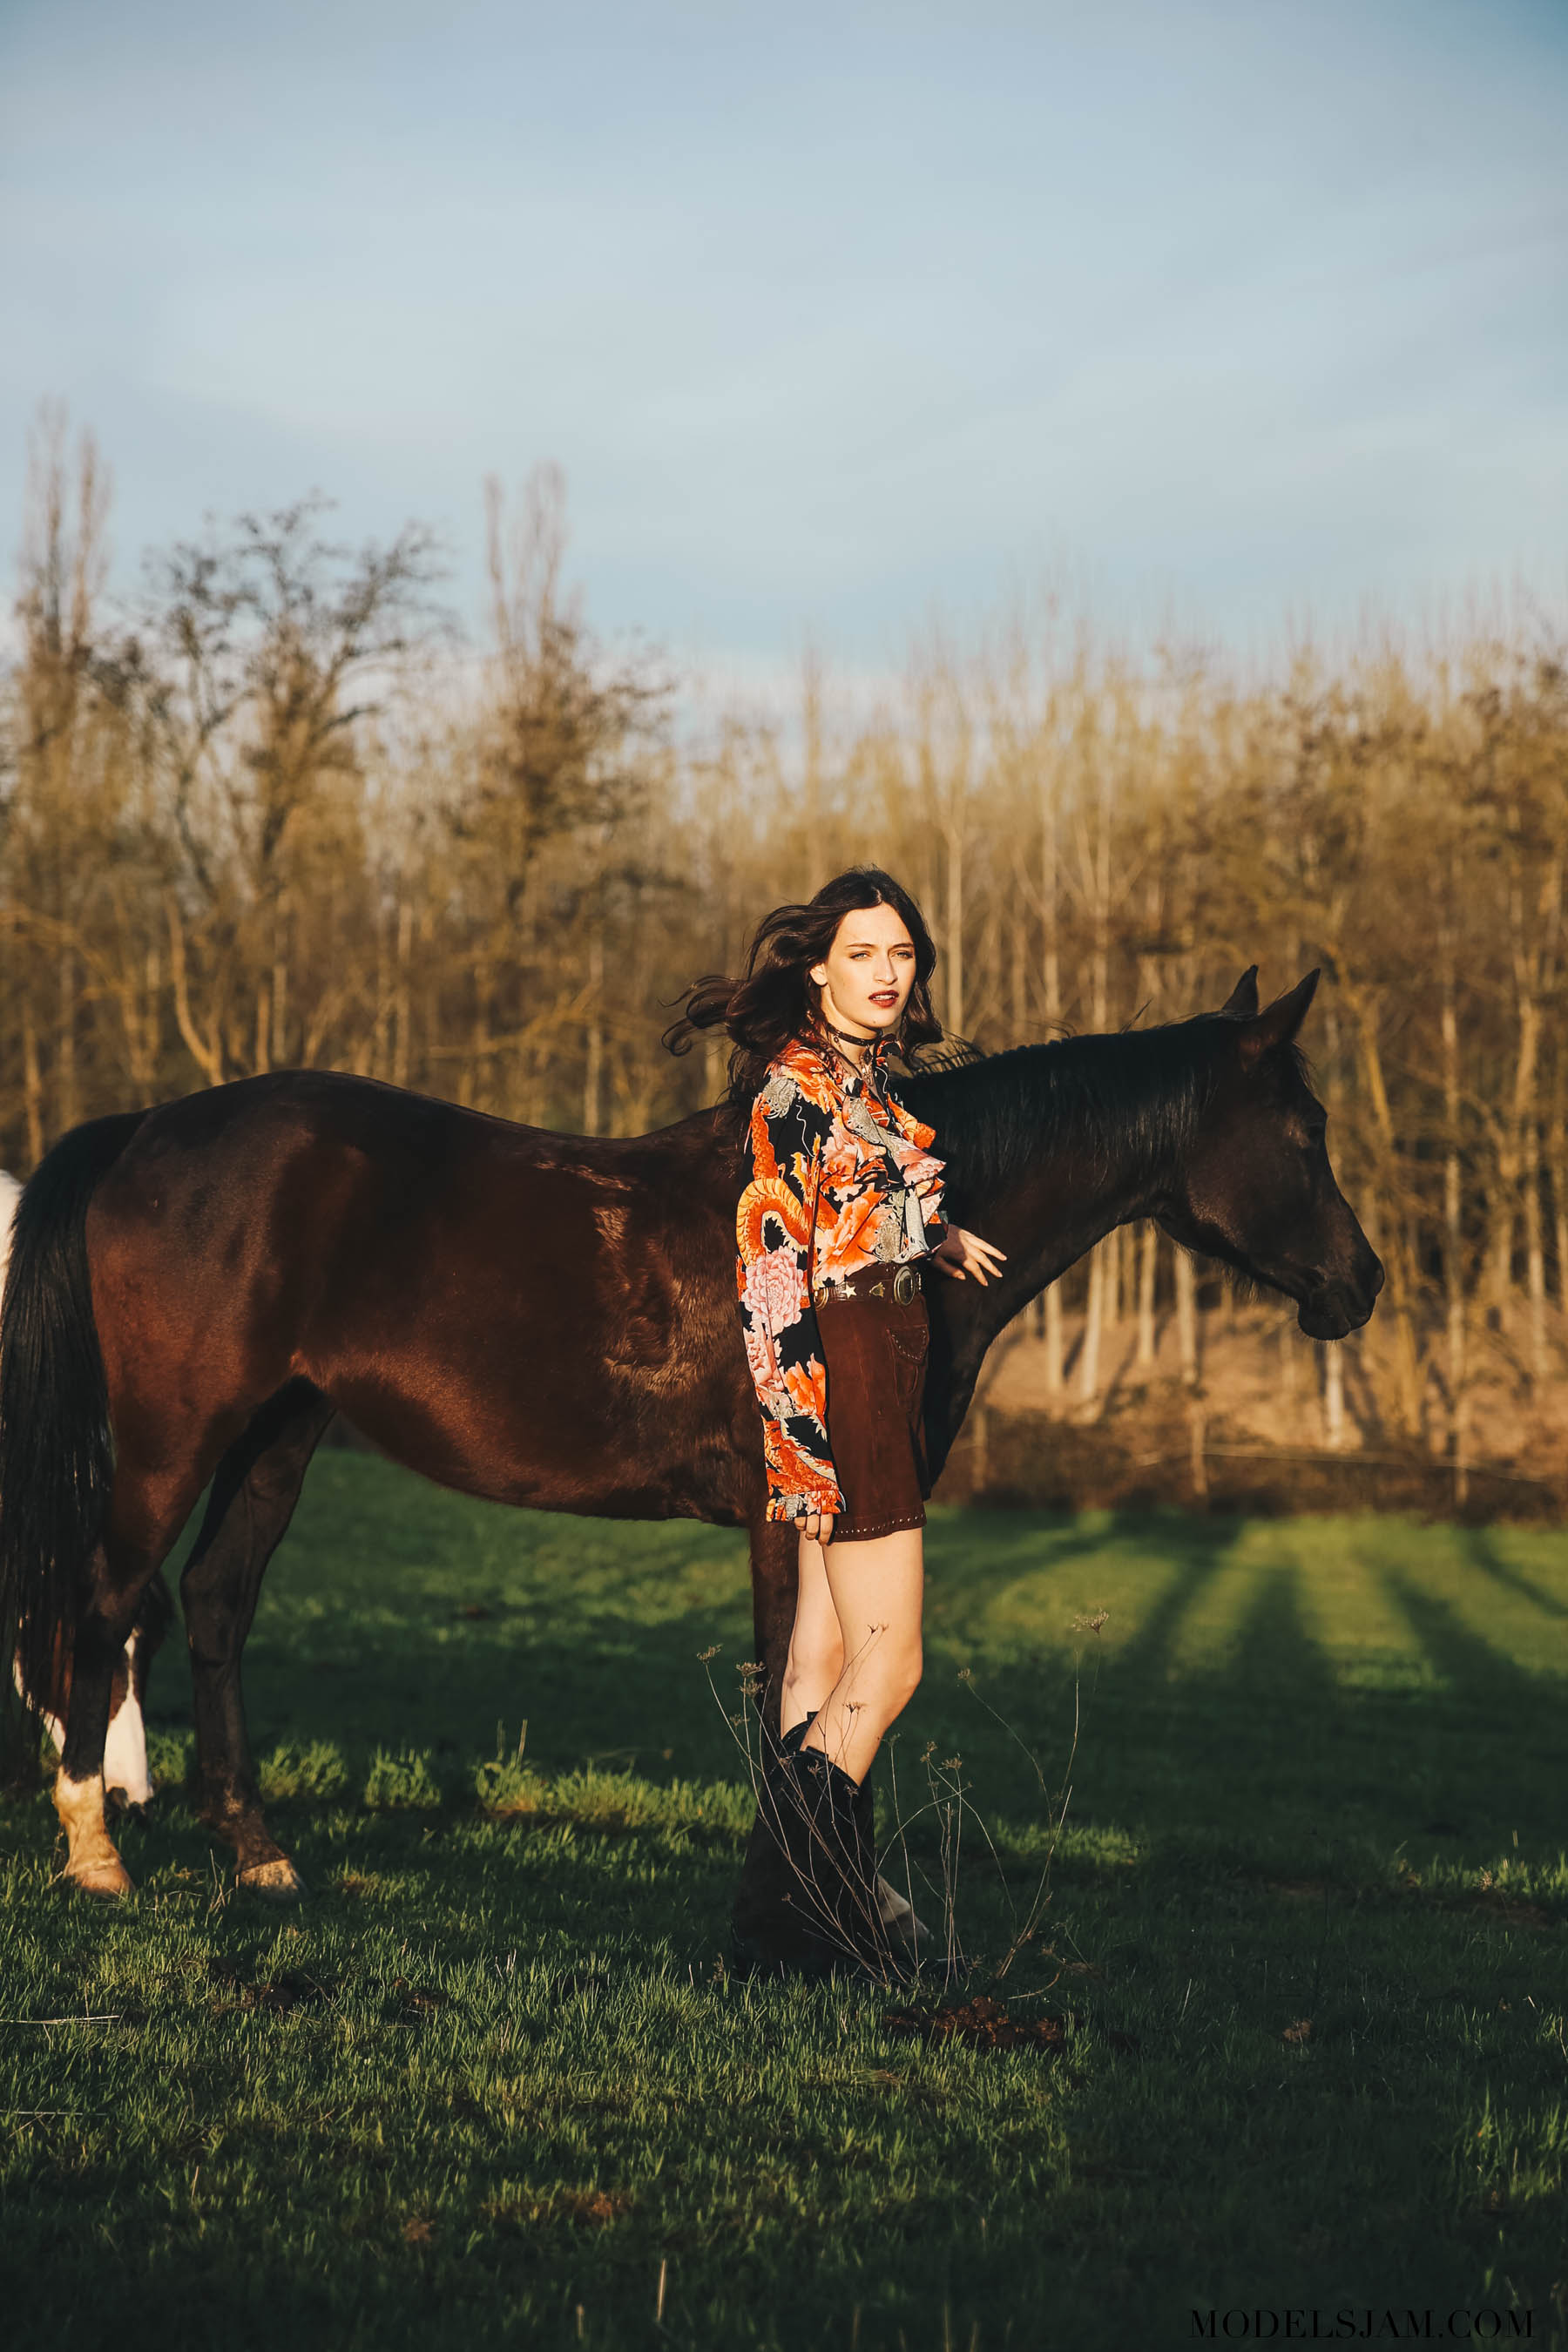 Benedetta Casaluce is photographed by Pier Grassano and styled by Angelica Ardasheva for Models Jam editorial wearing redemption blouse Blessed skirt Horse Ac Ranch